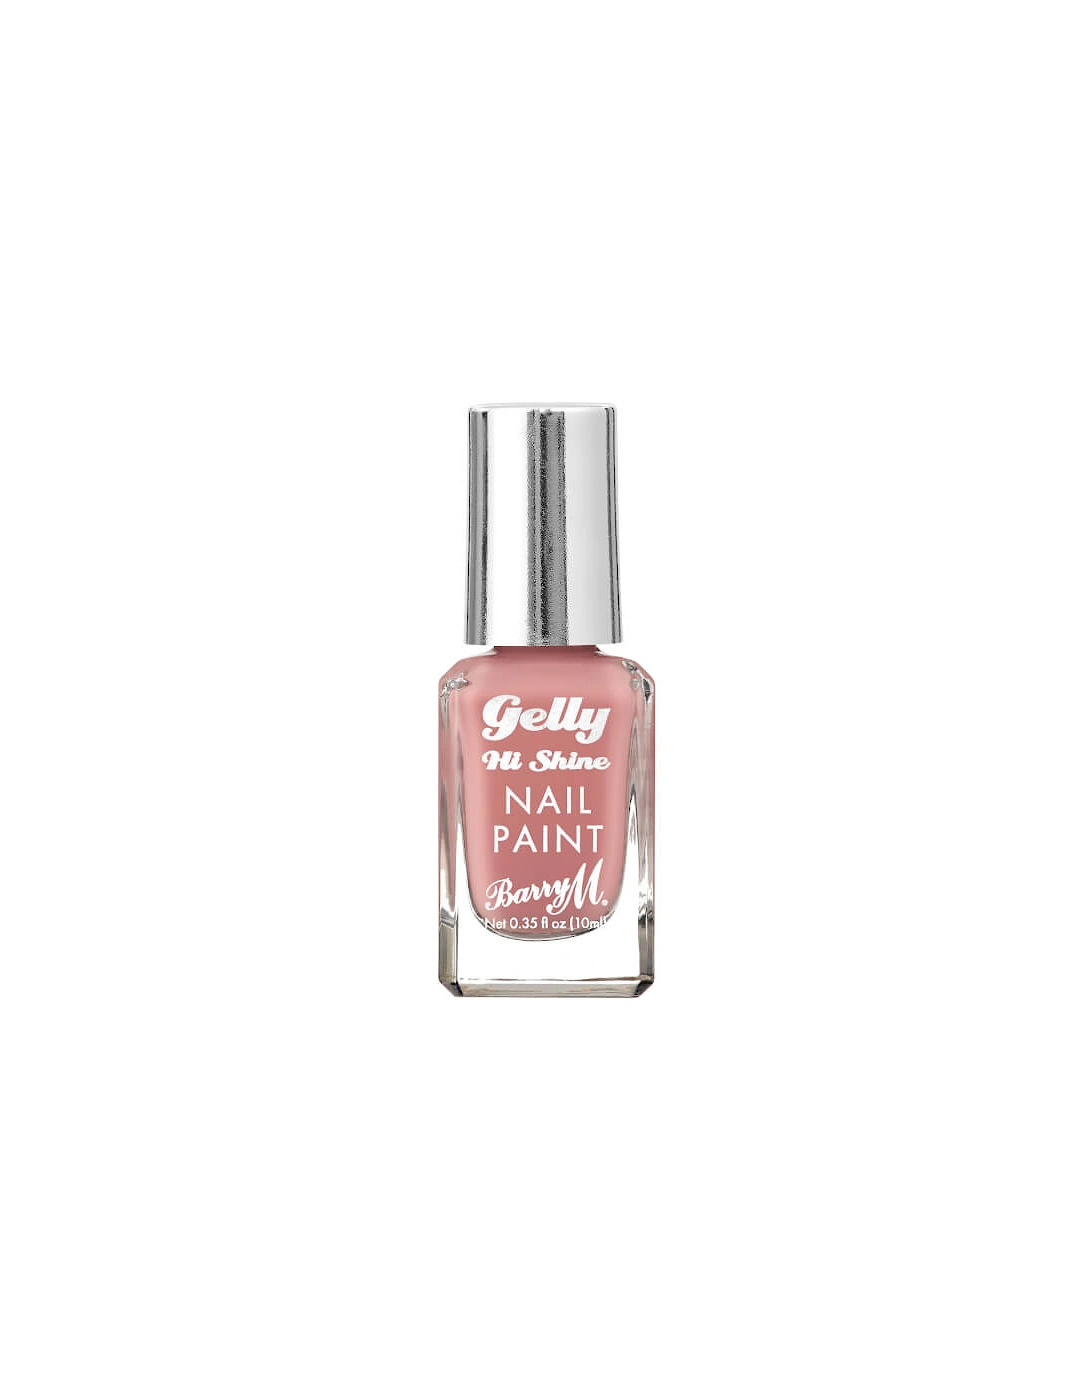 Gelly Nail Paint - Honeysuckle, 2 of 1